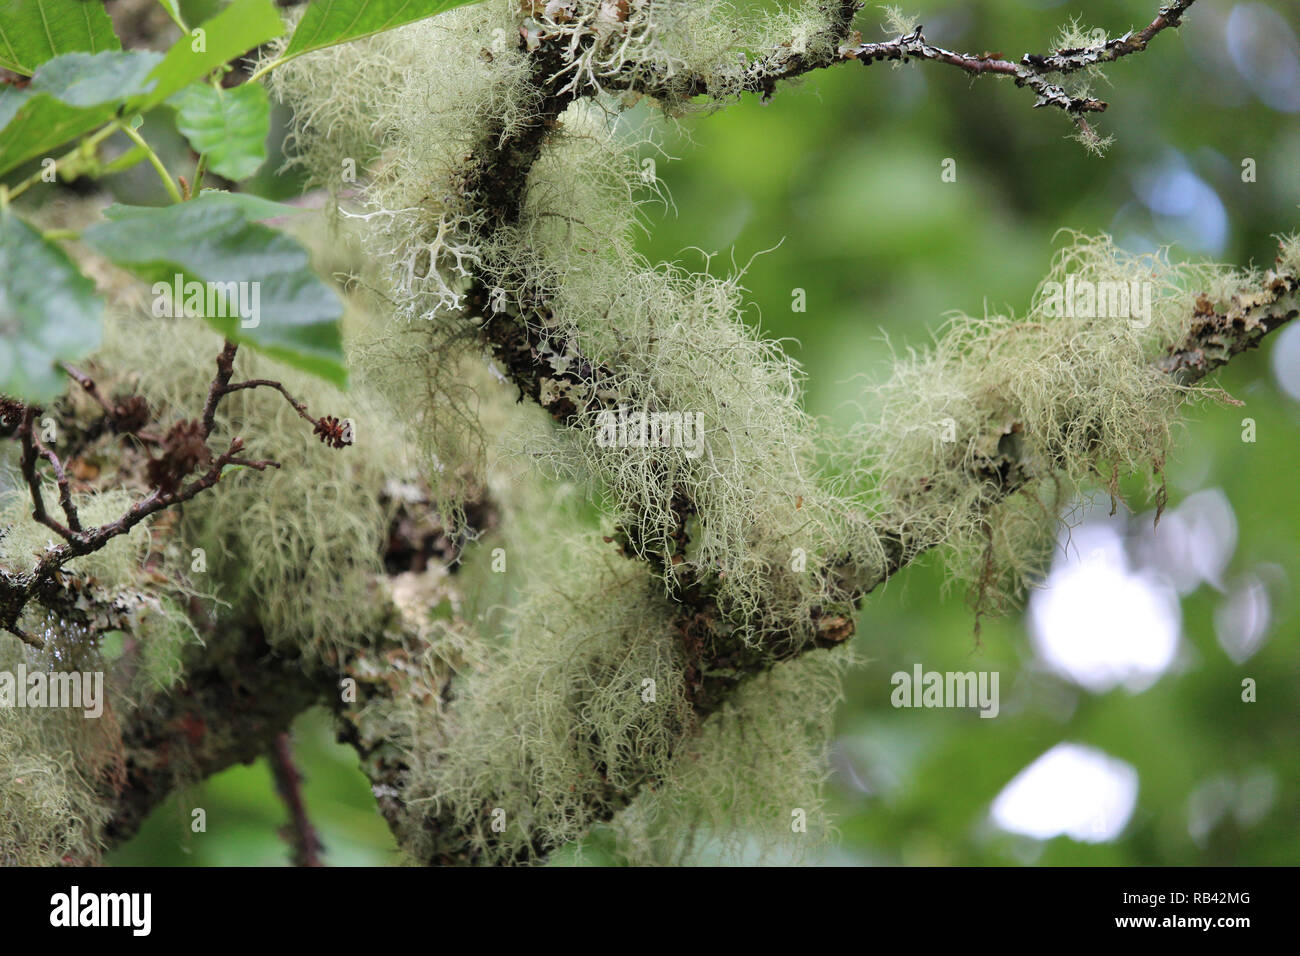 Close up image of Old man’s beard lichen (Usnea filipendula), growing outdoors on a tree in a natural setting. Stock Photo